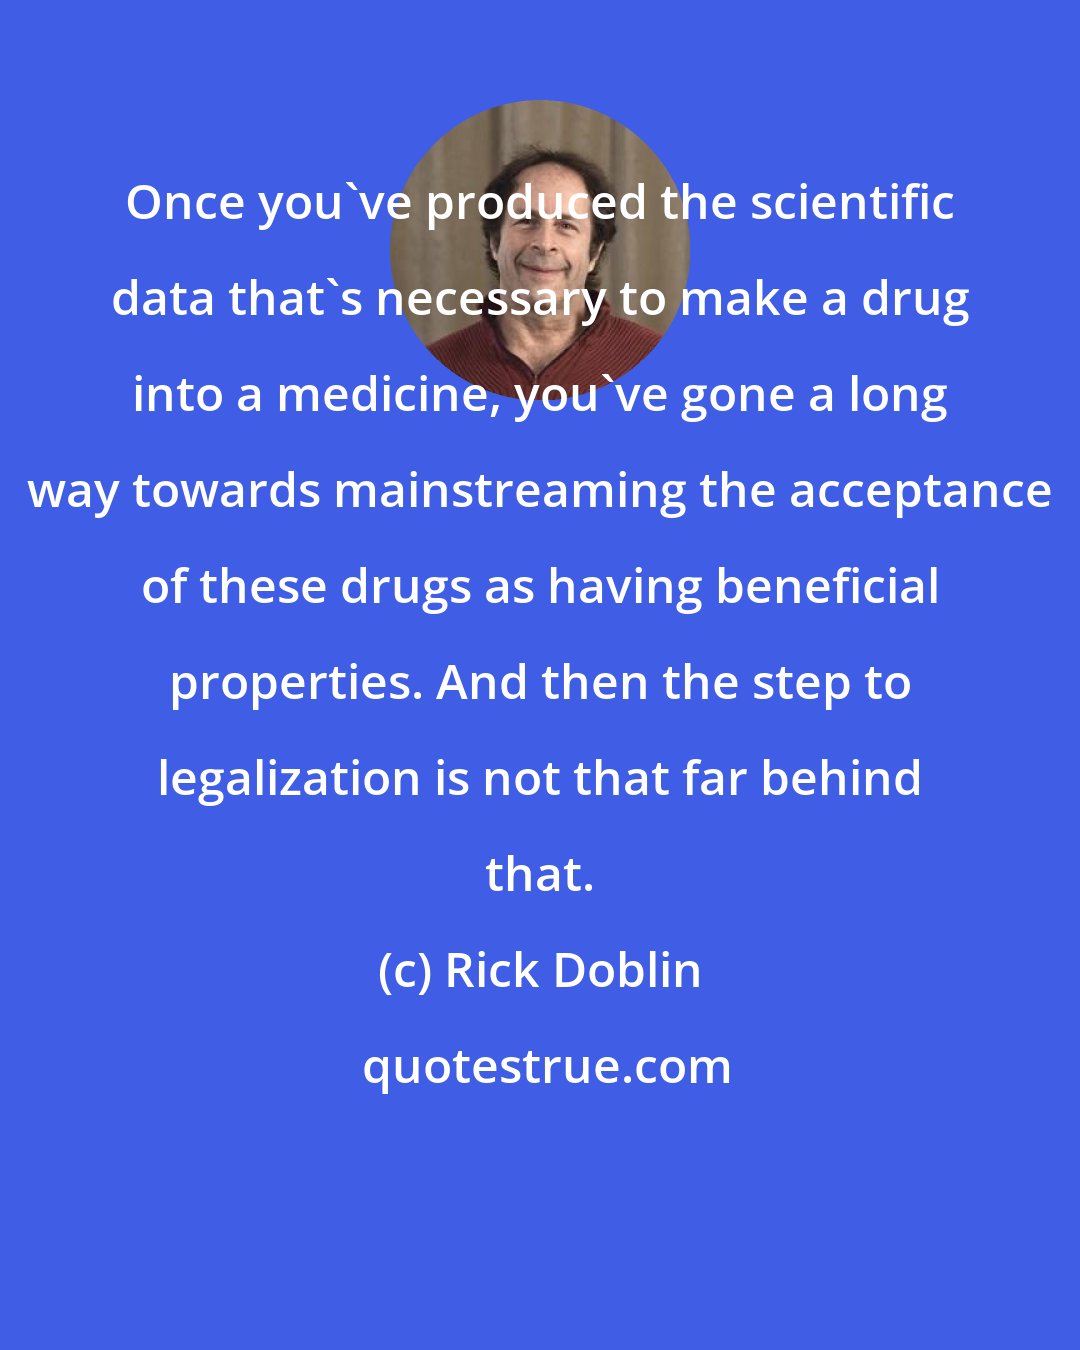 Rick Doblin: Once you've produced the scientific data that's necessary to make a drug into a medicine, you've gone a long way towards mainstreaming the acceptance of these drugs as having beneficial properties. And then the step to legalization is not that far behind that.